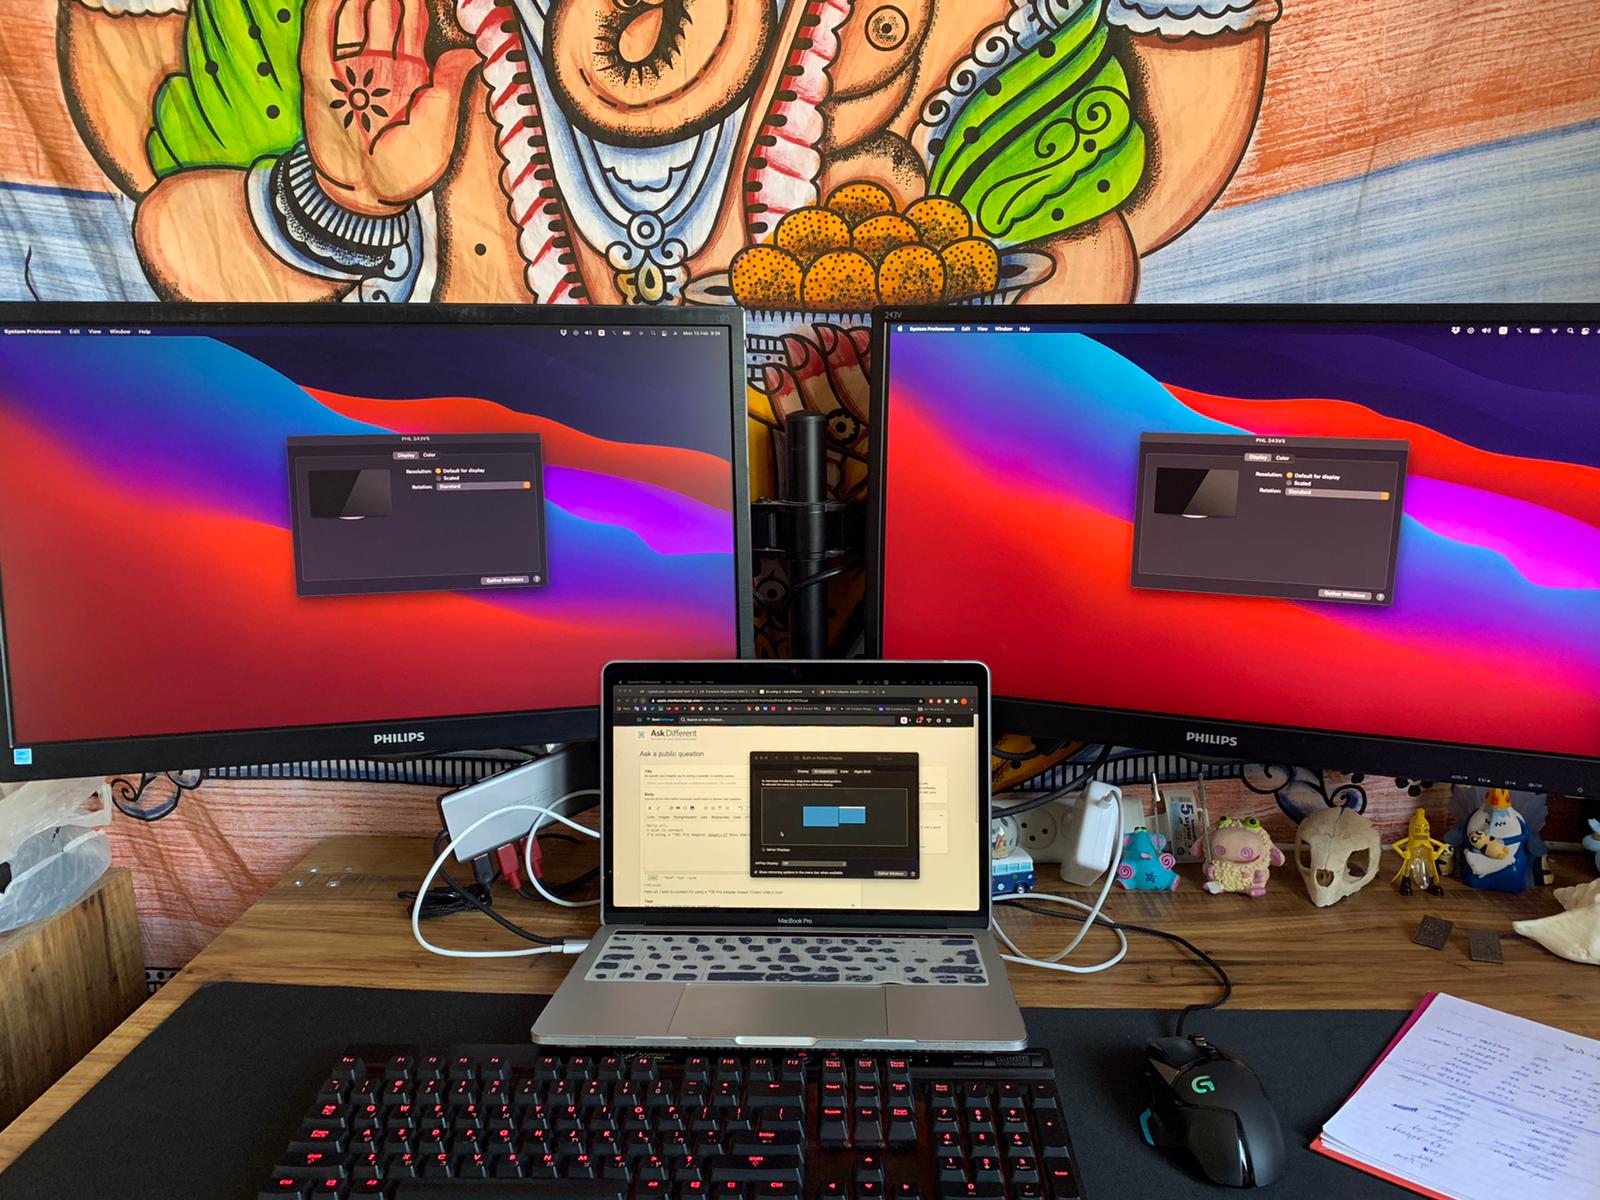 How To Connect A Macbook Pro To A Monitor